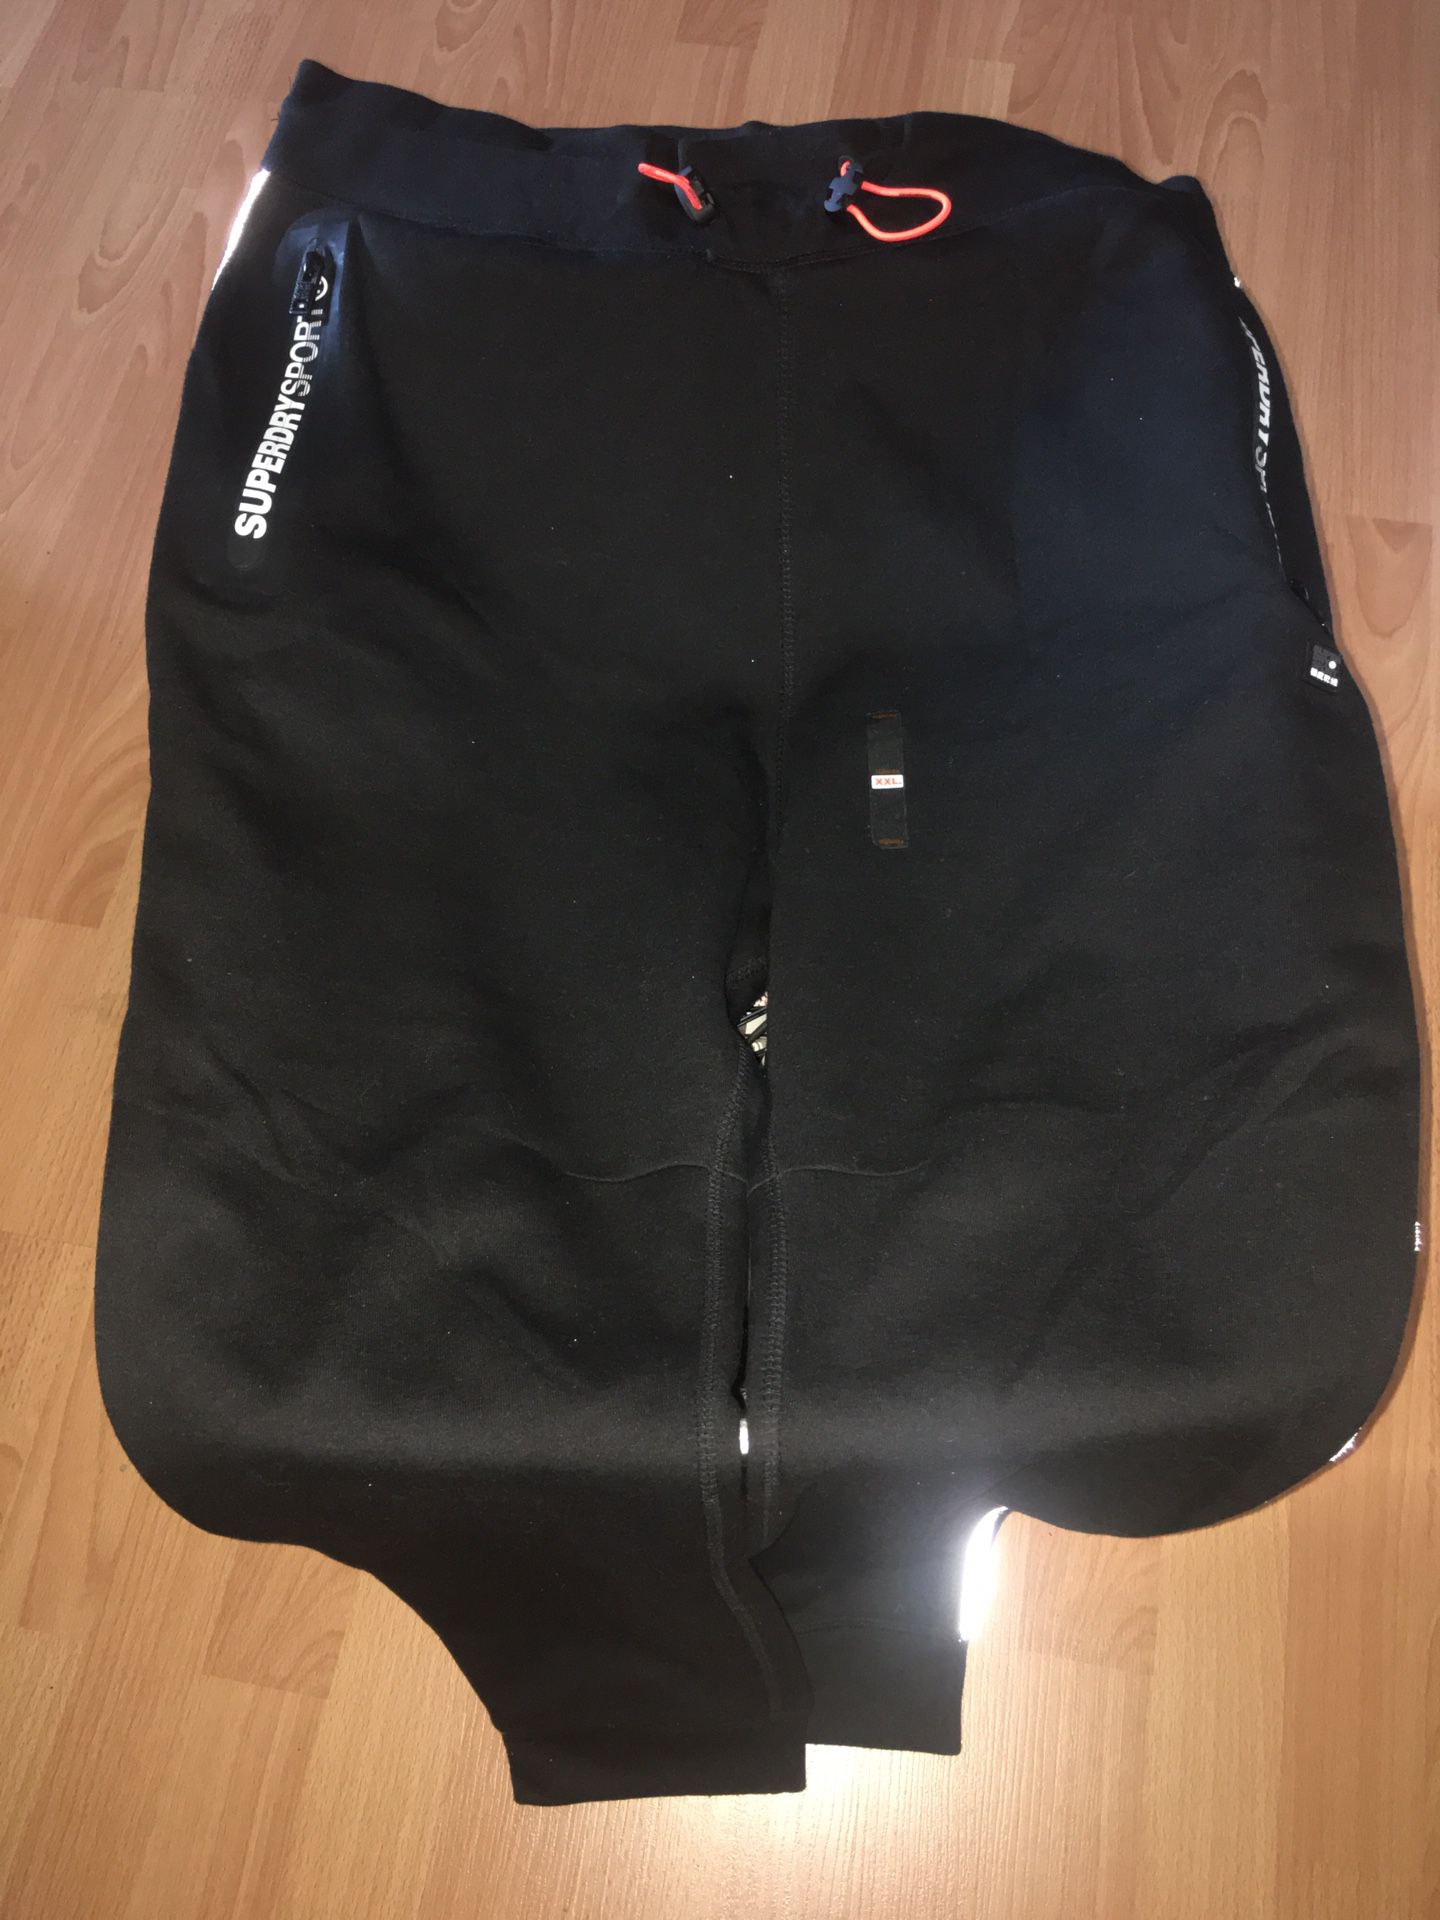 Super dry joggers 2xl BRAND NEW WITH TAGS